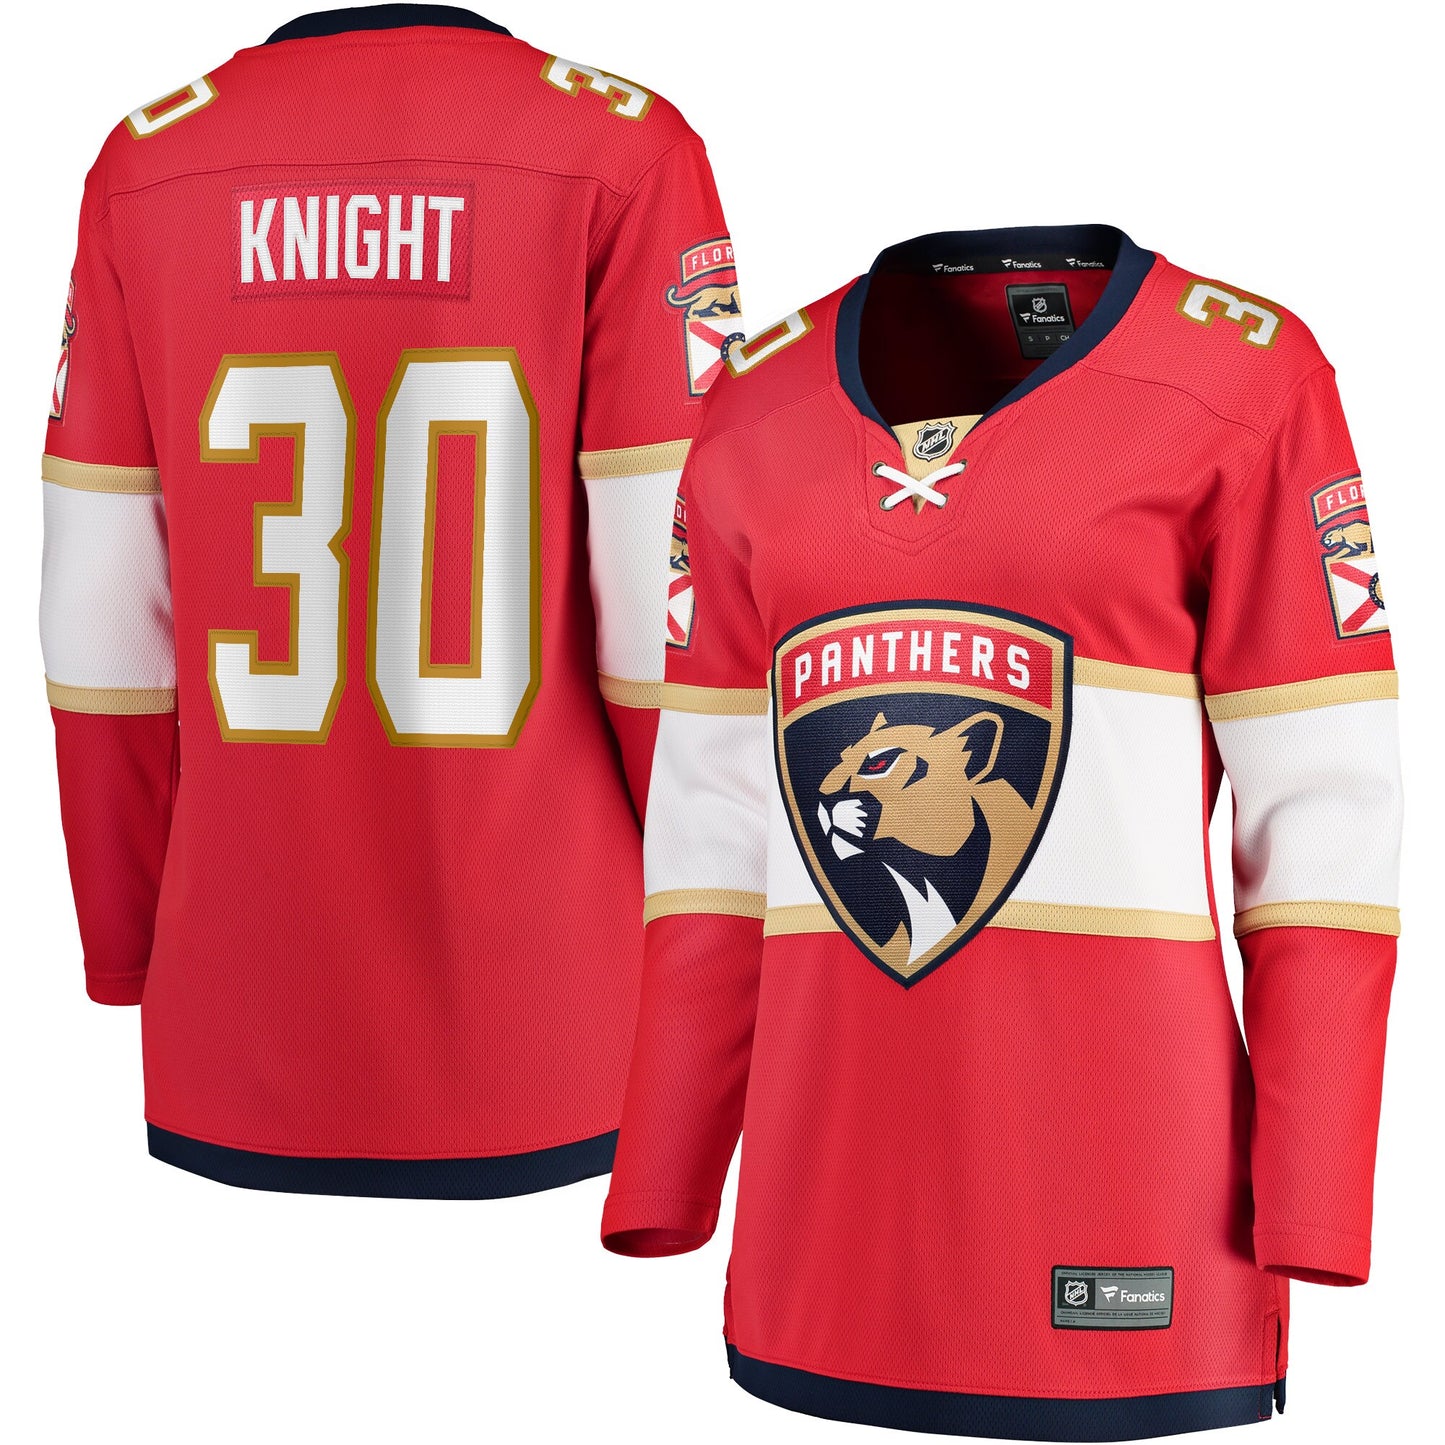 Spencer Knight Florida Panthers Fanatics Branded Women's 2017/18 Home Breakaway Jersey - Red